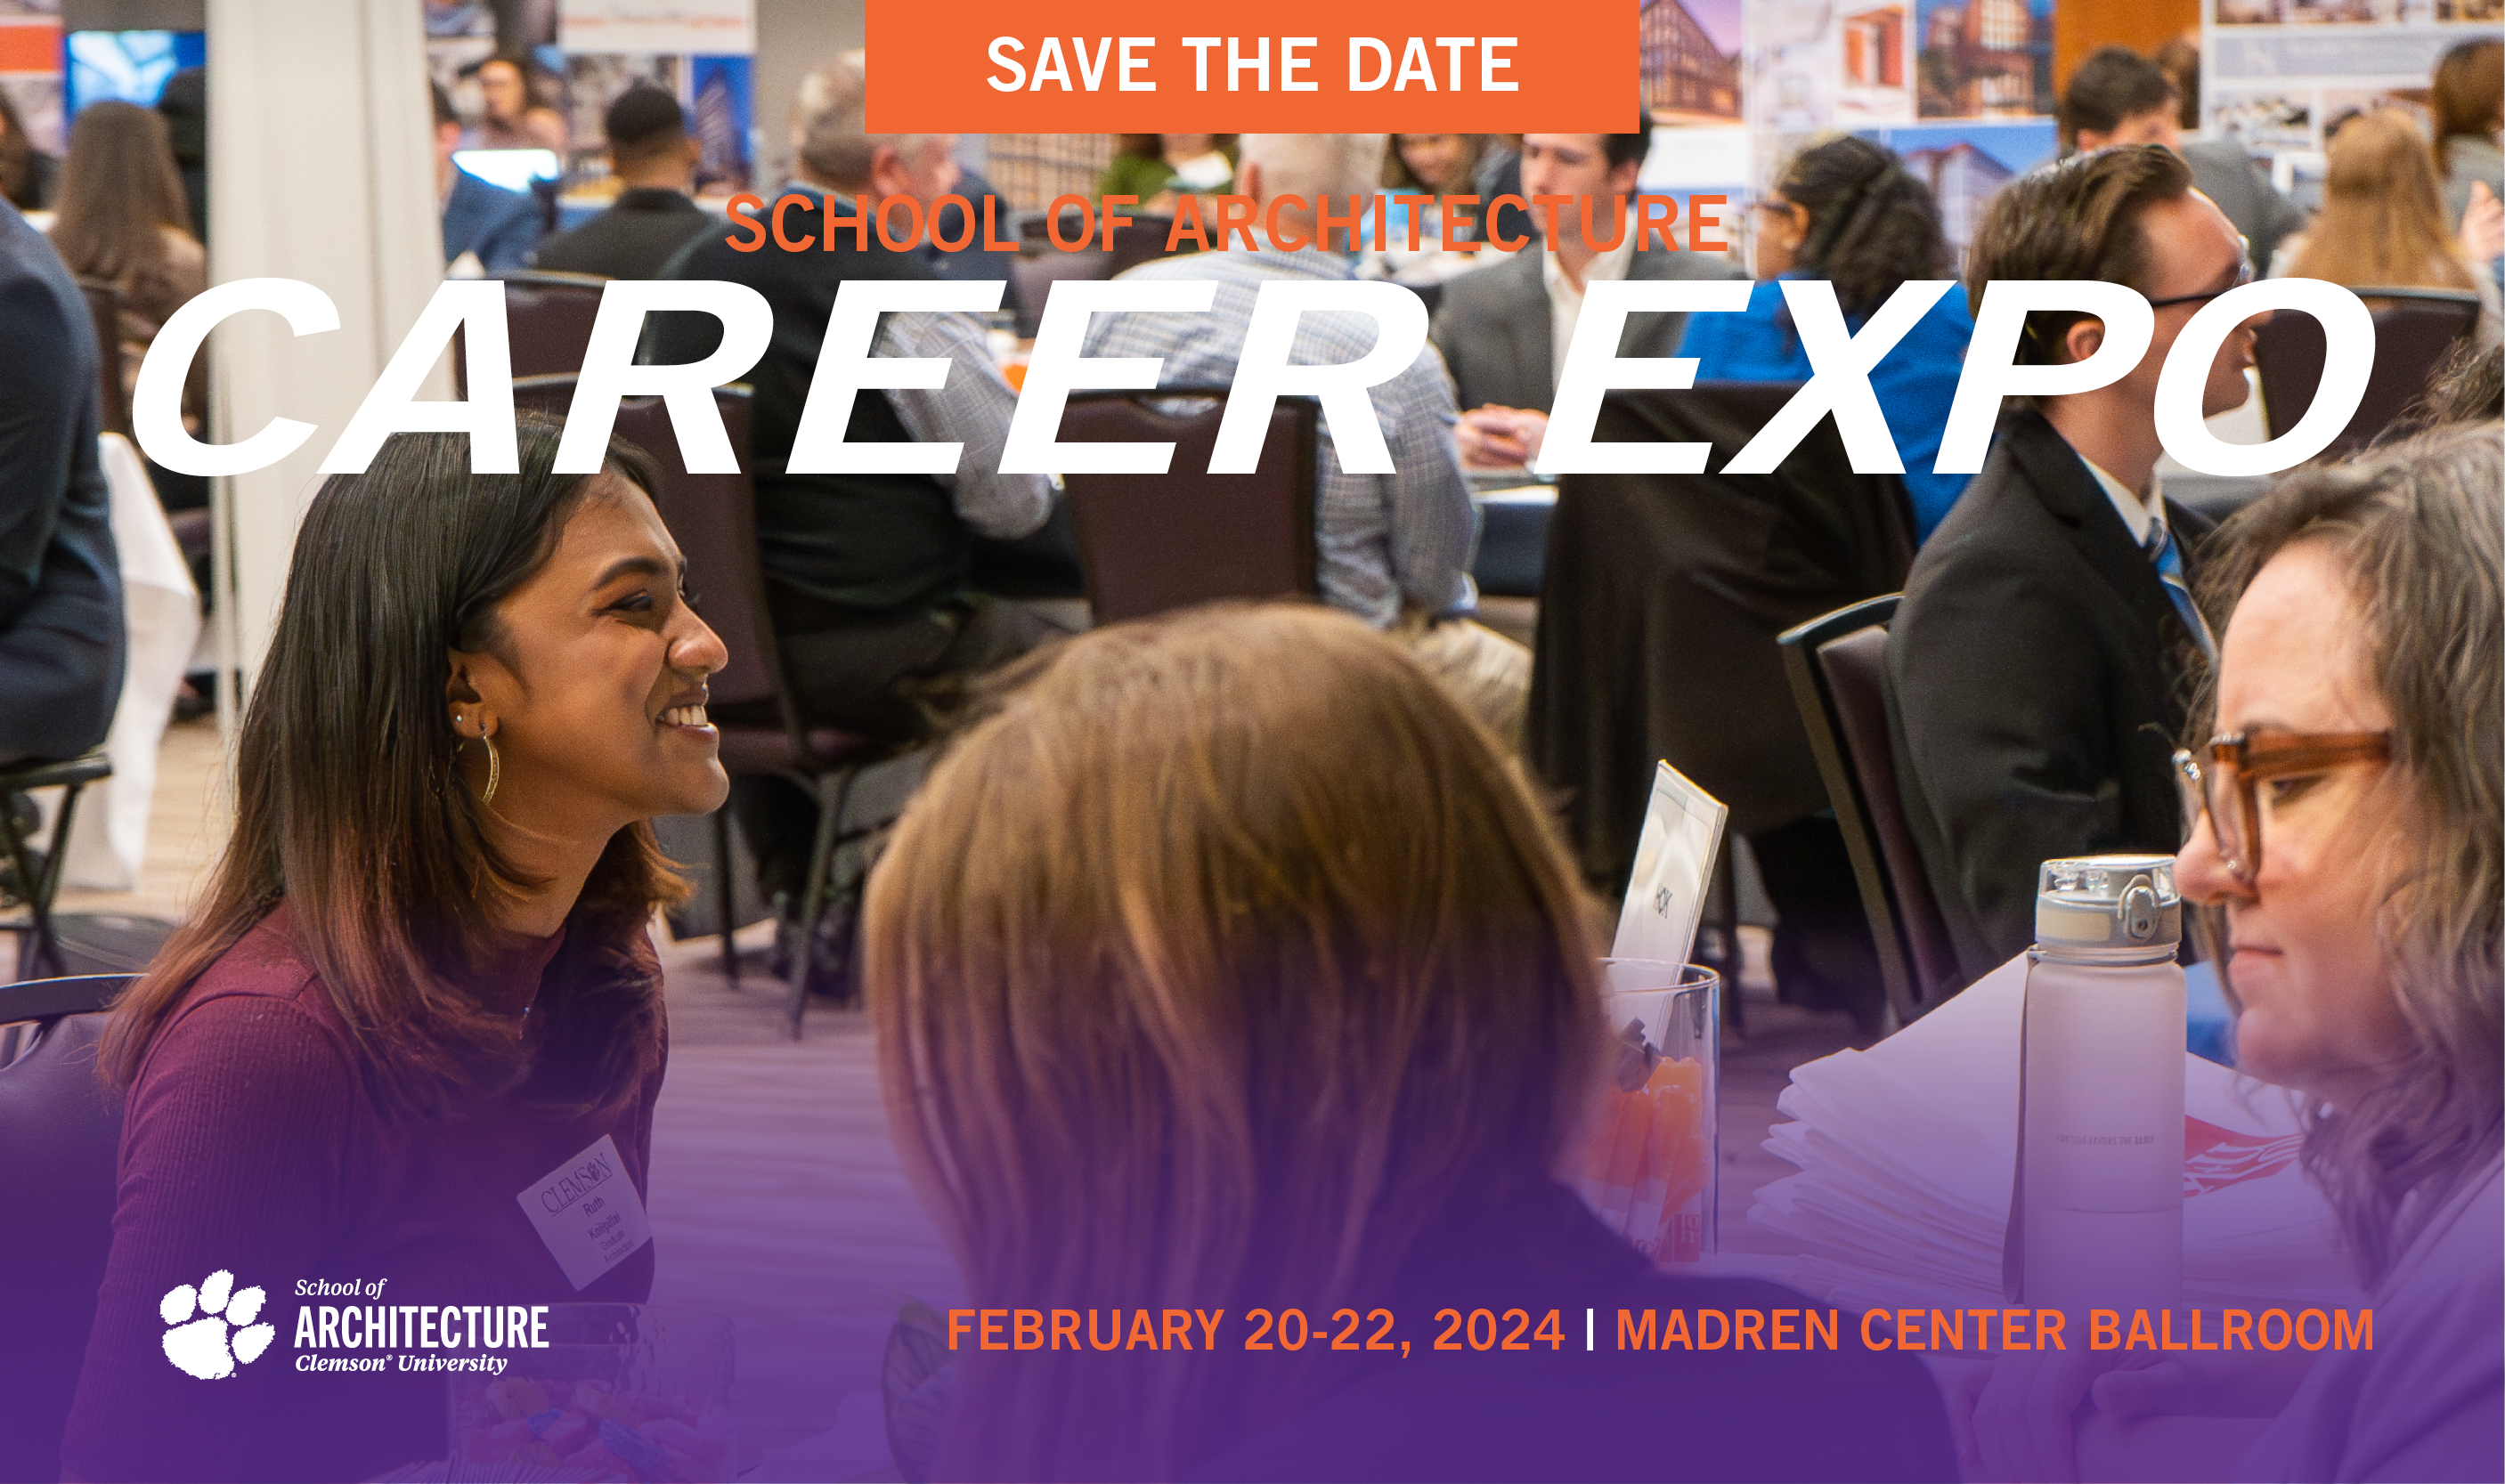 An image of the career expo flyer.